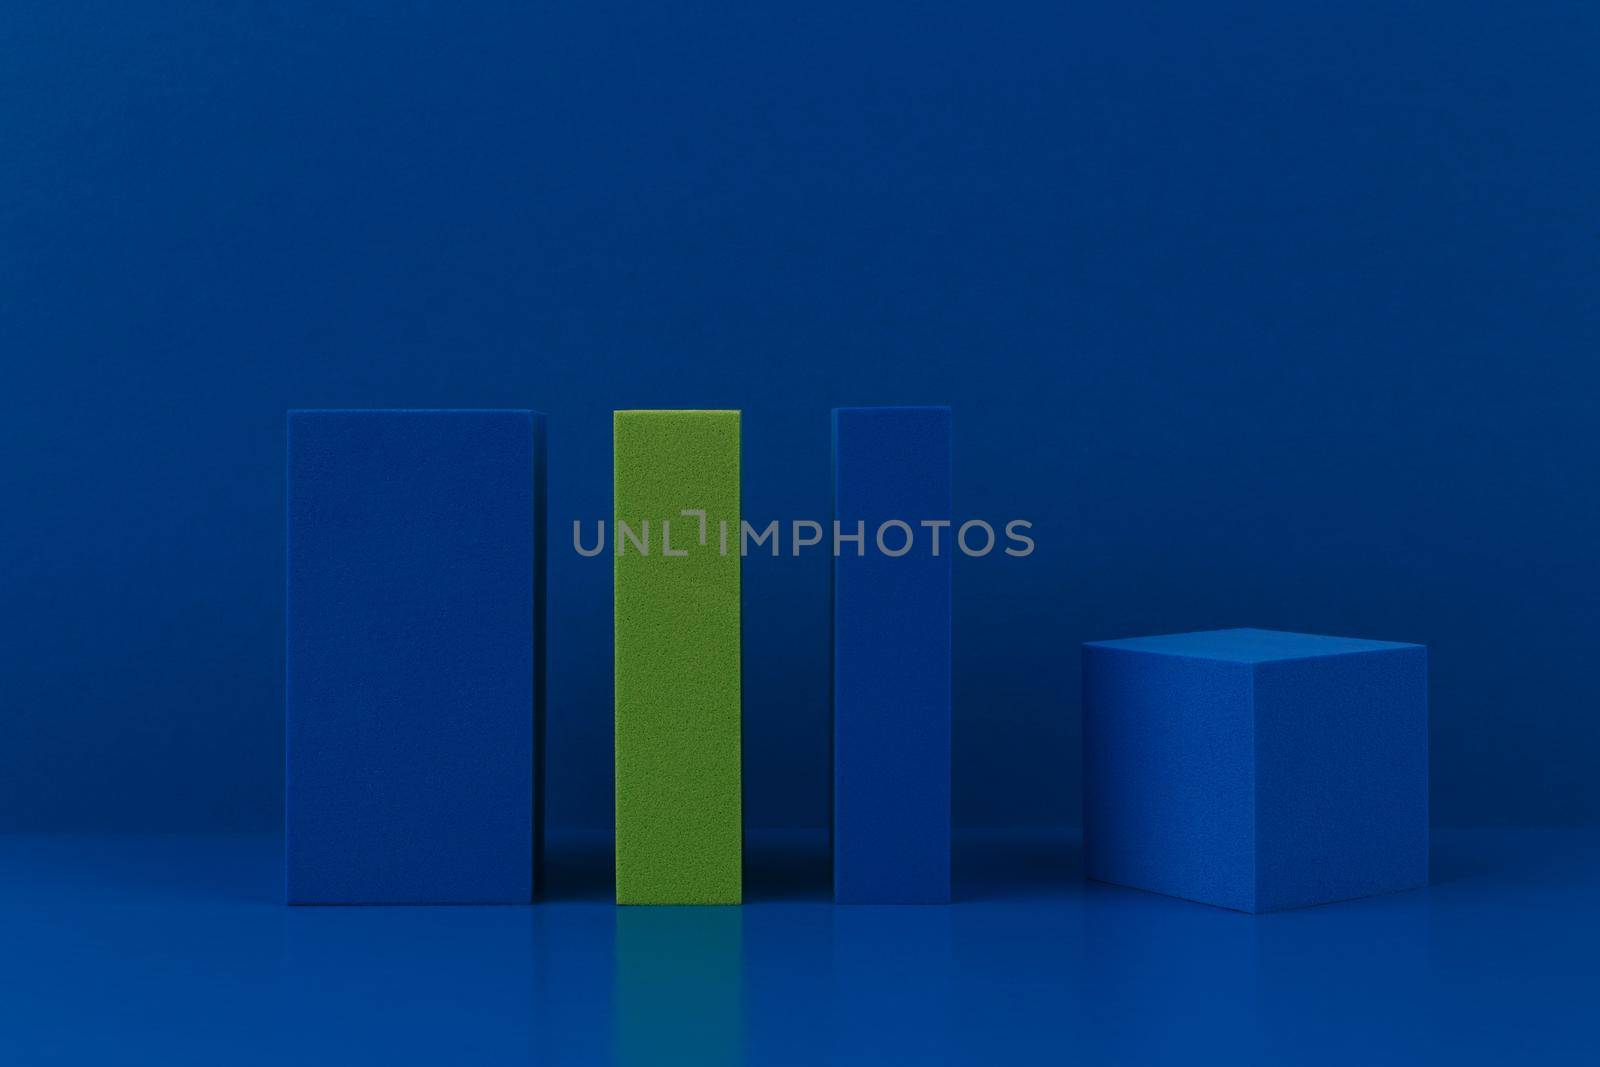 Abstract duotone background template with blue and green geometric figures against dark blue background. Concept of minimalism and futurism